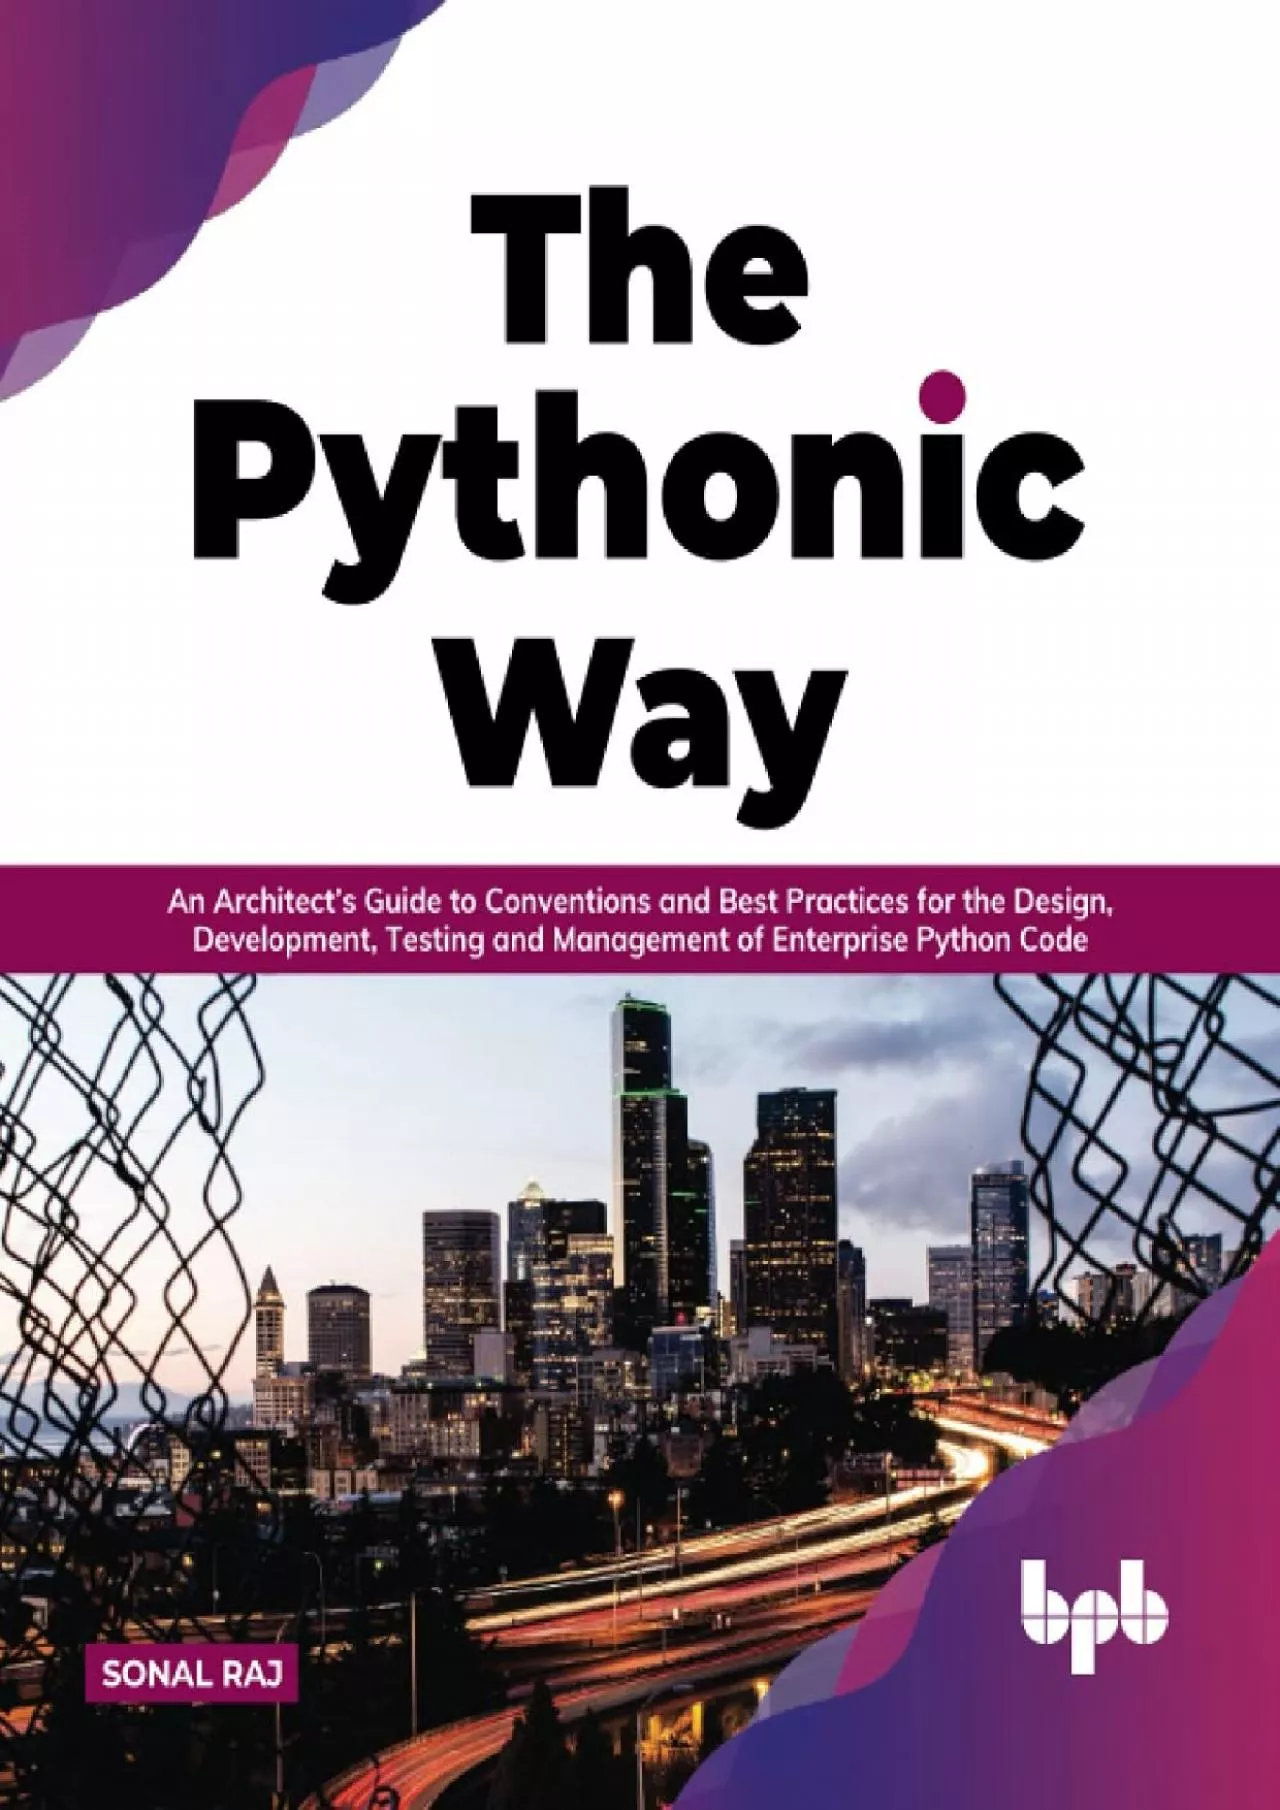 [FREE]-The Pythonic Way: An Architect’s Guide to Conventions and Best Practices for